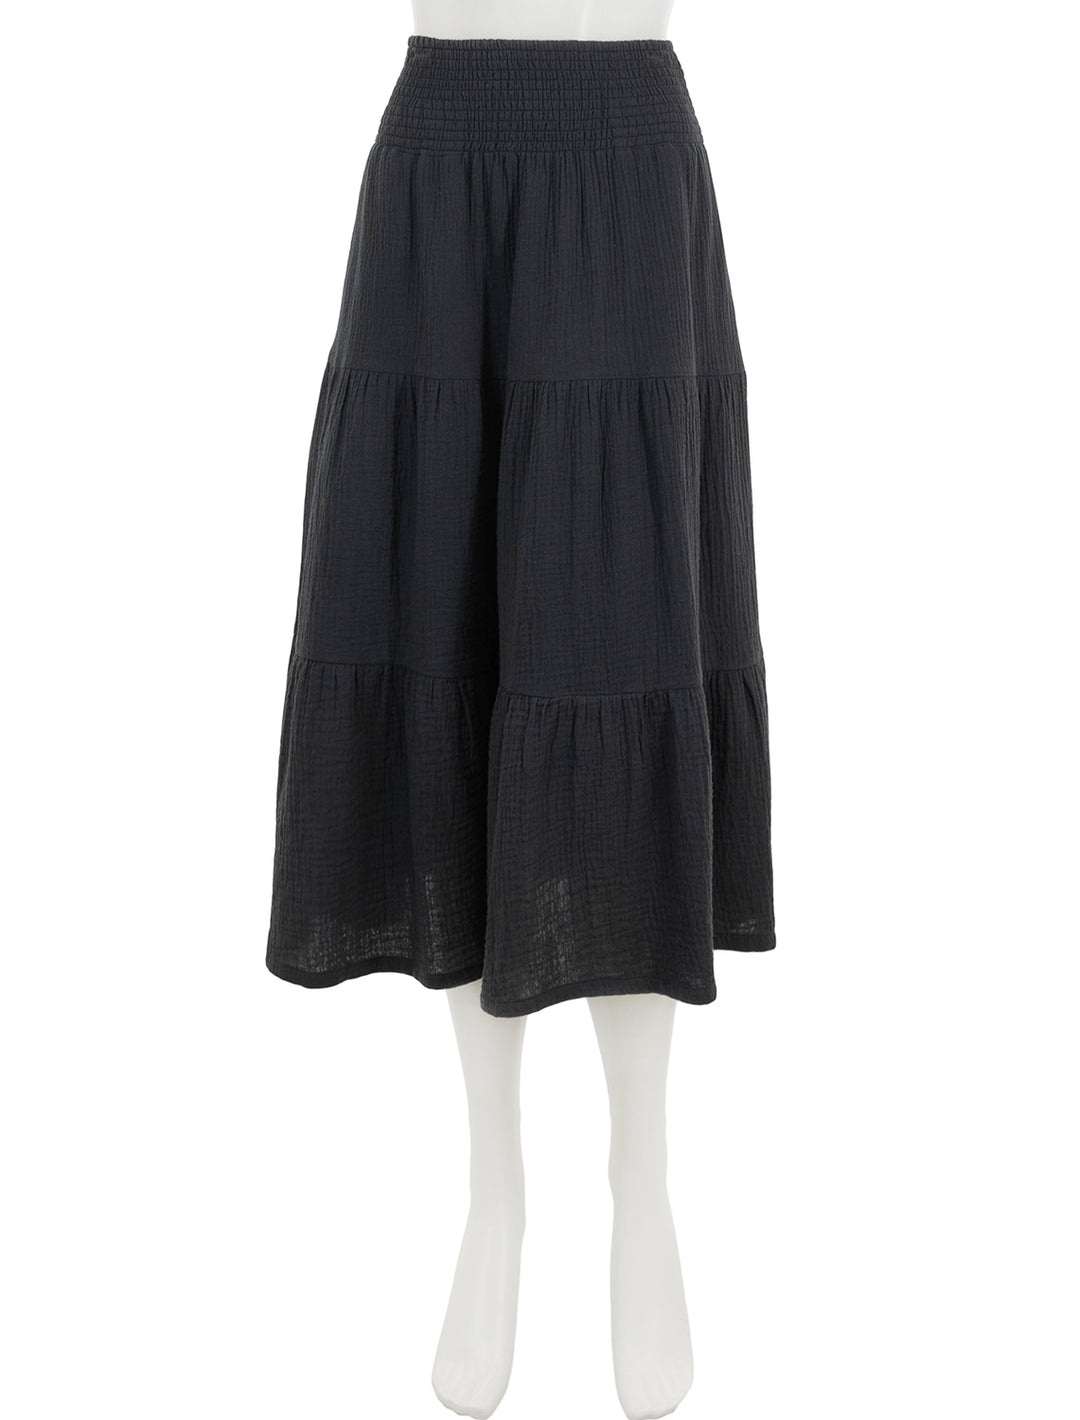 Front view of marine layer's corinne smocked waist maxi skirt in black.